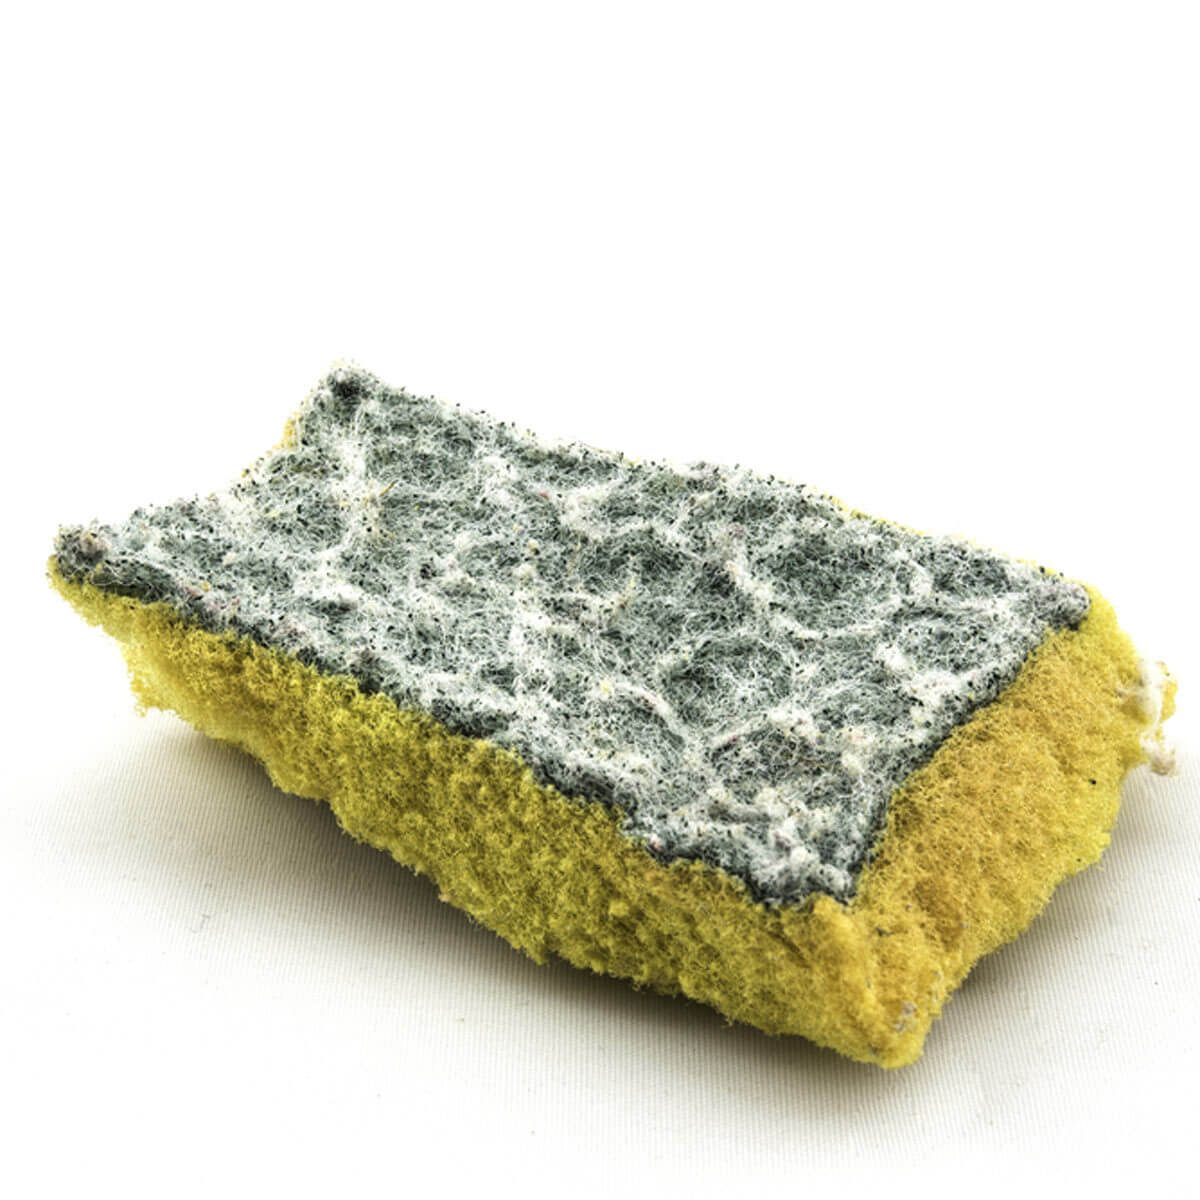 How to Keep a Kitchen Sponge From Smelling